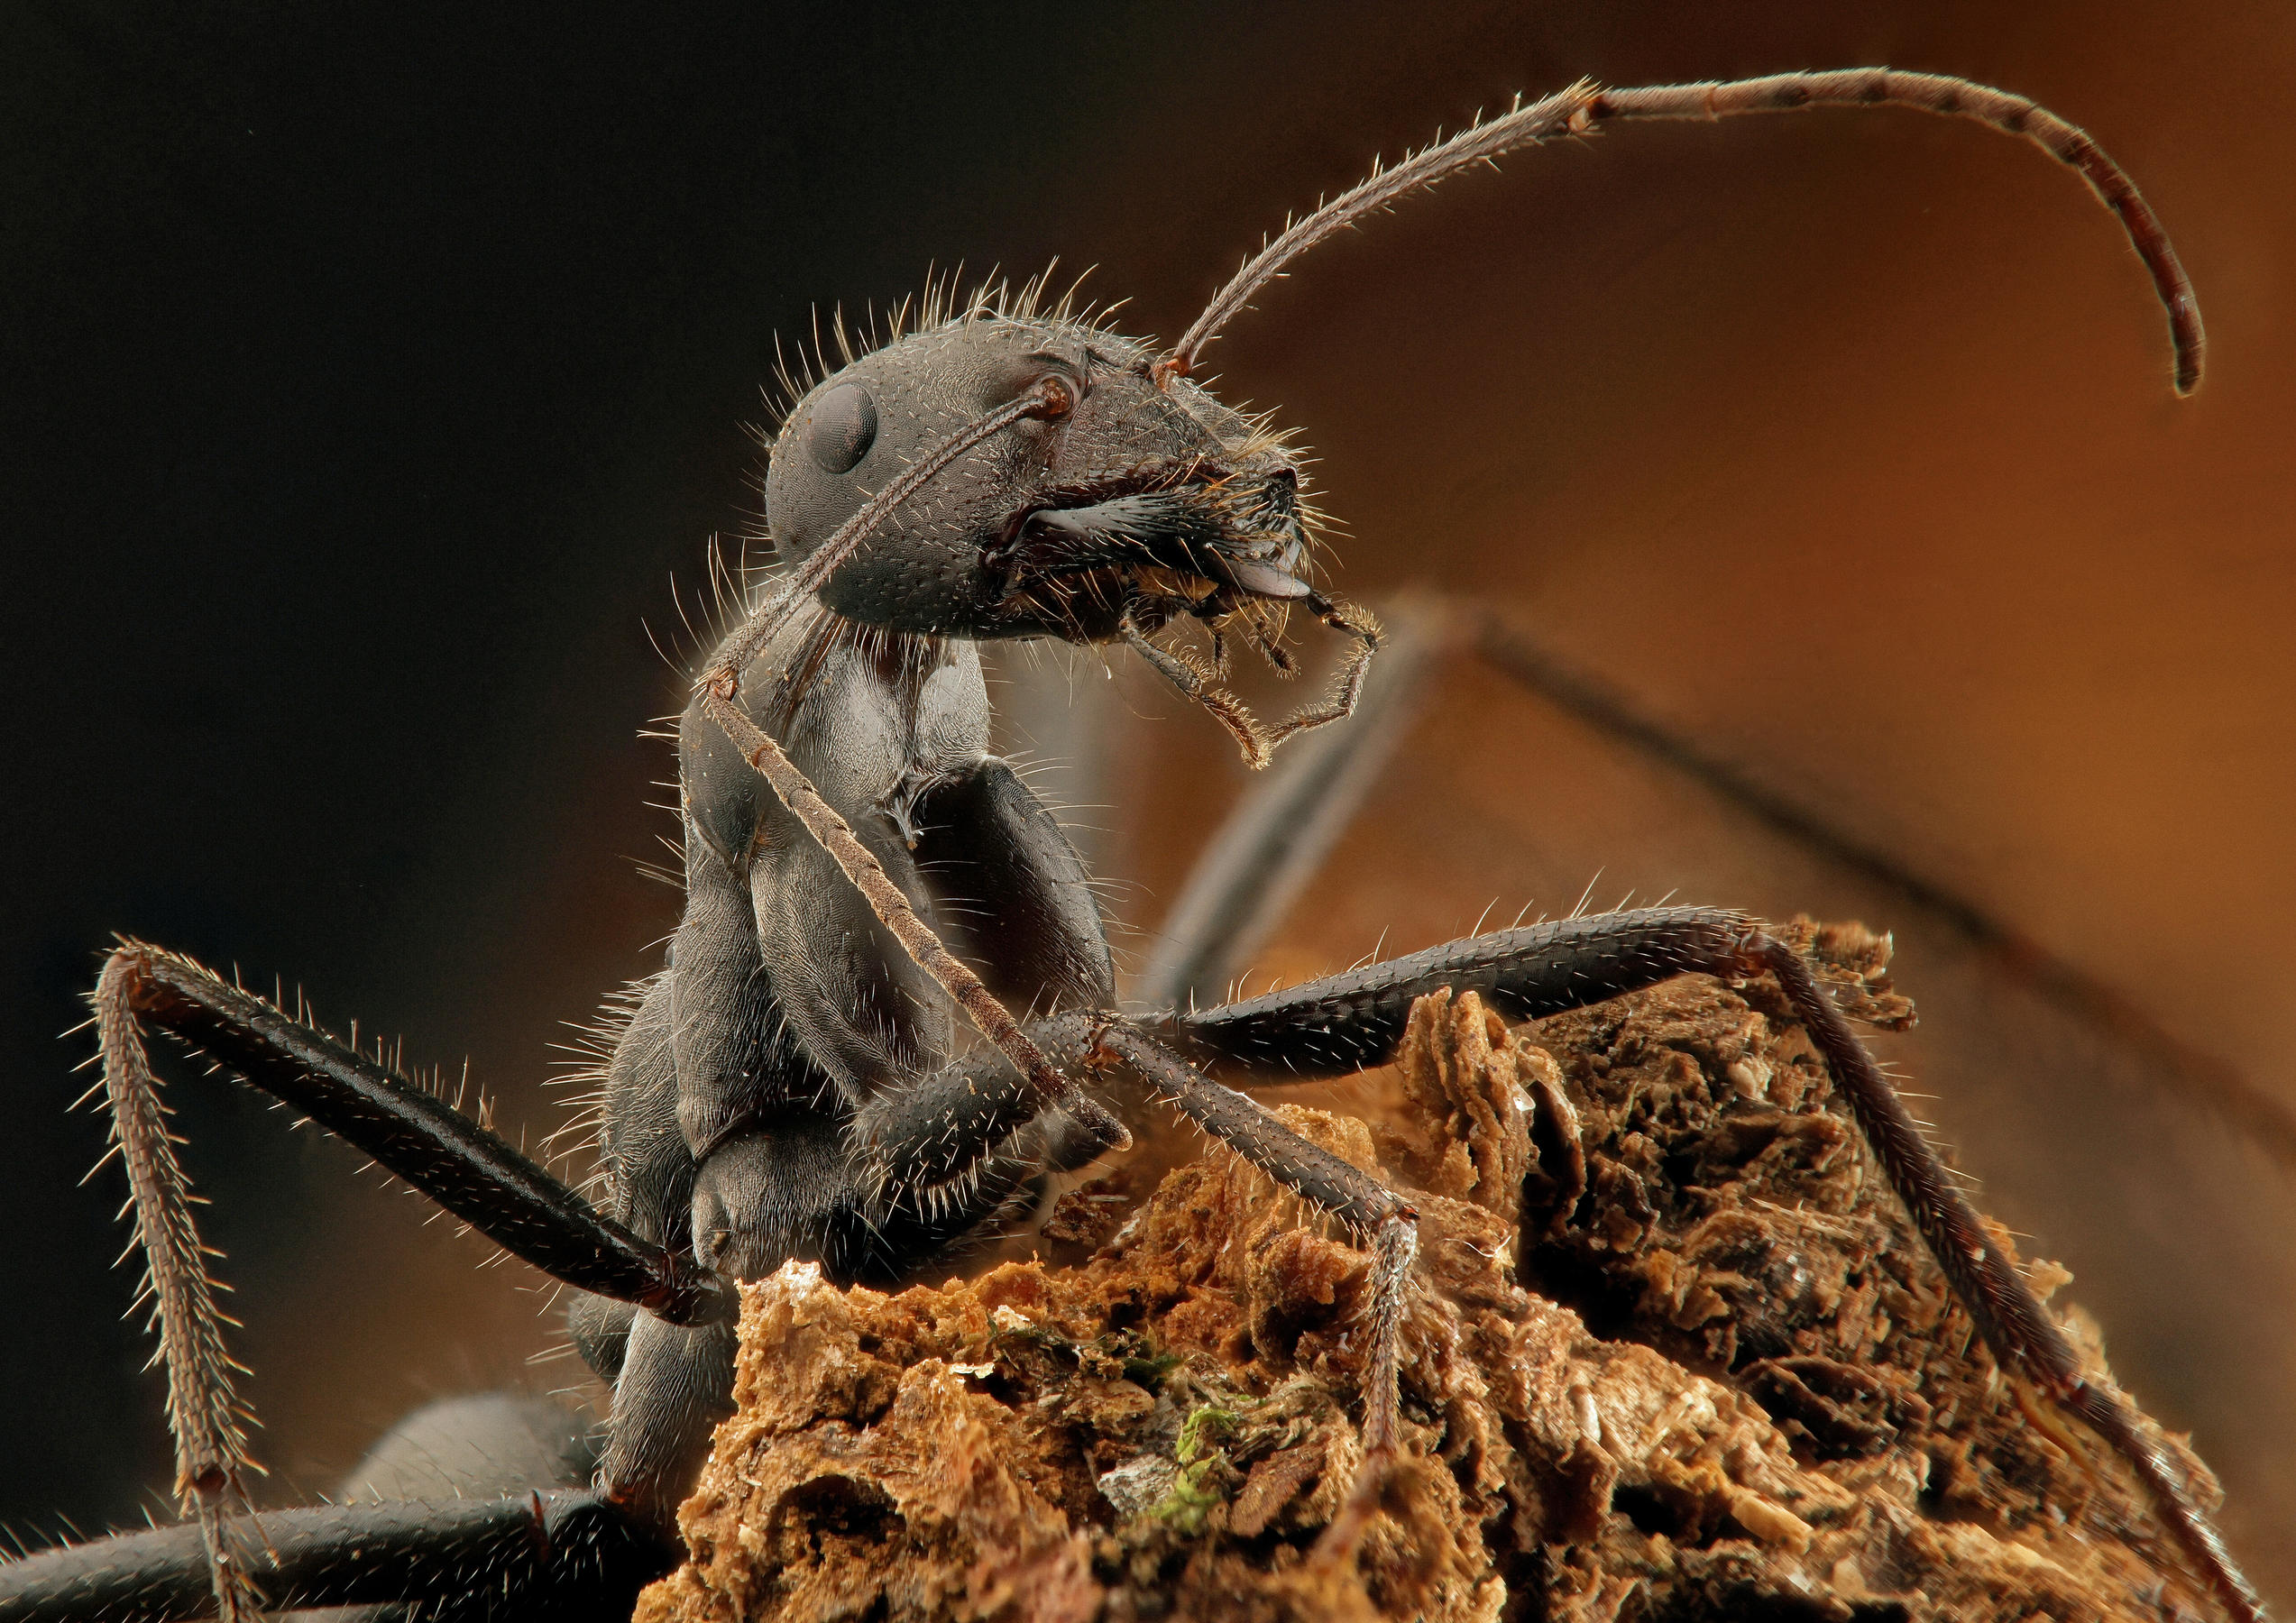 'Little Ant' by Roger Mepsted, journal of wild culture ©2020